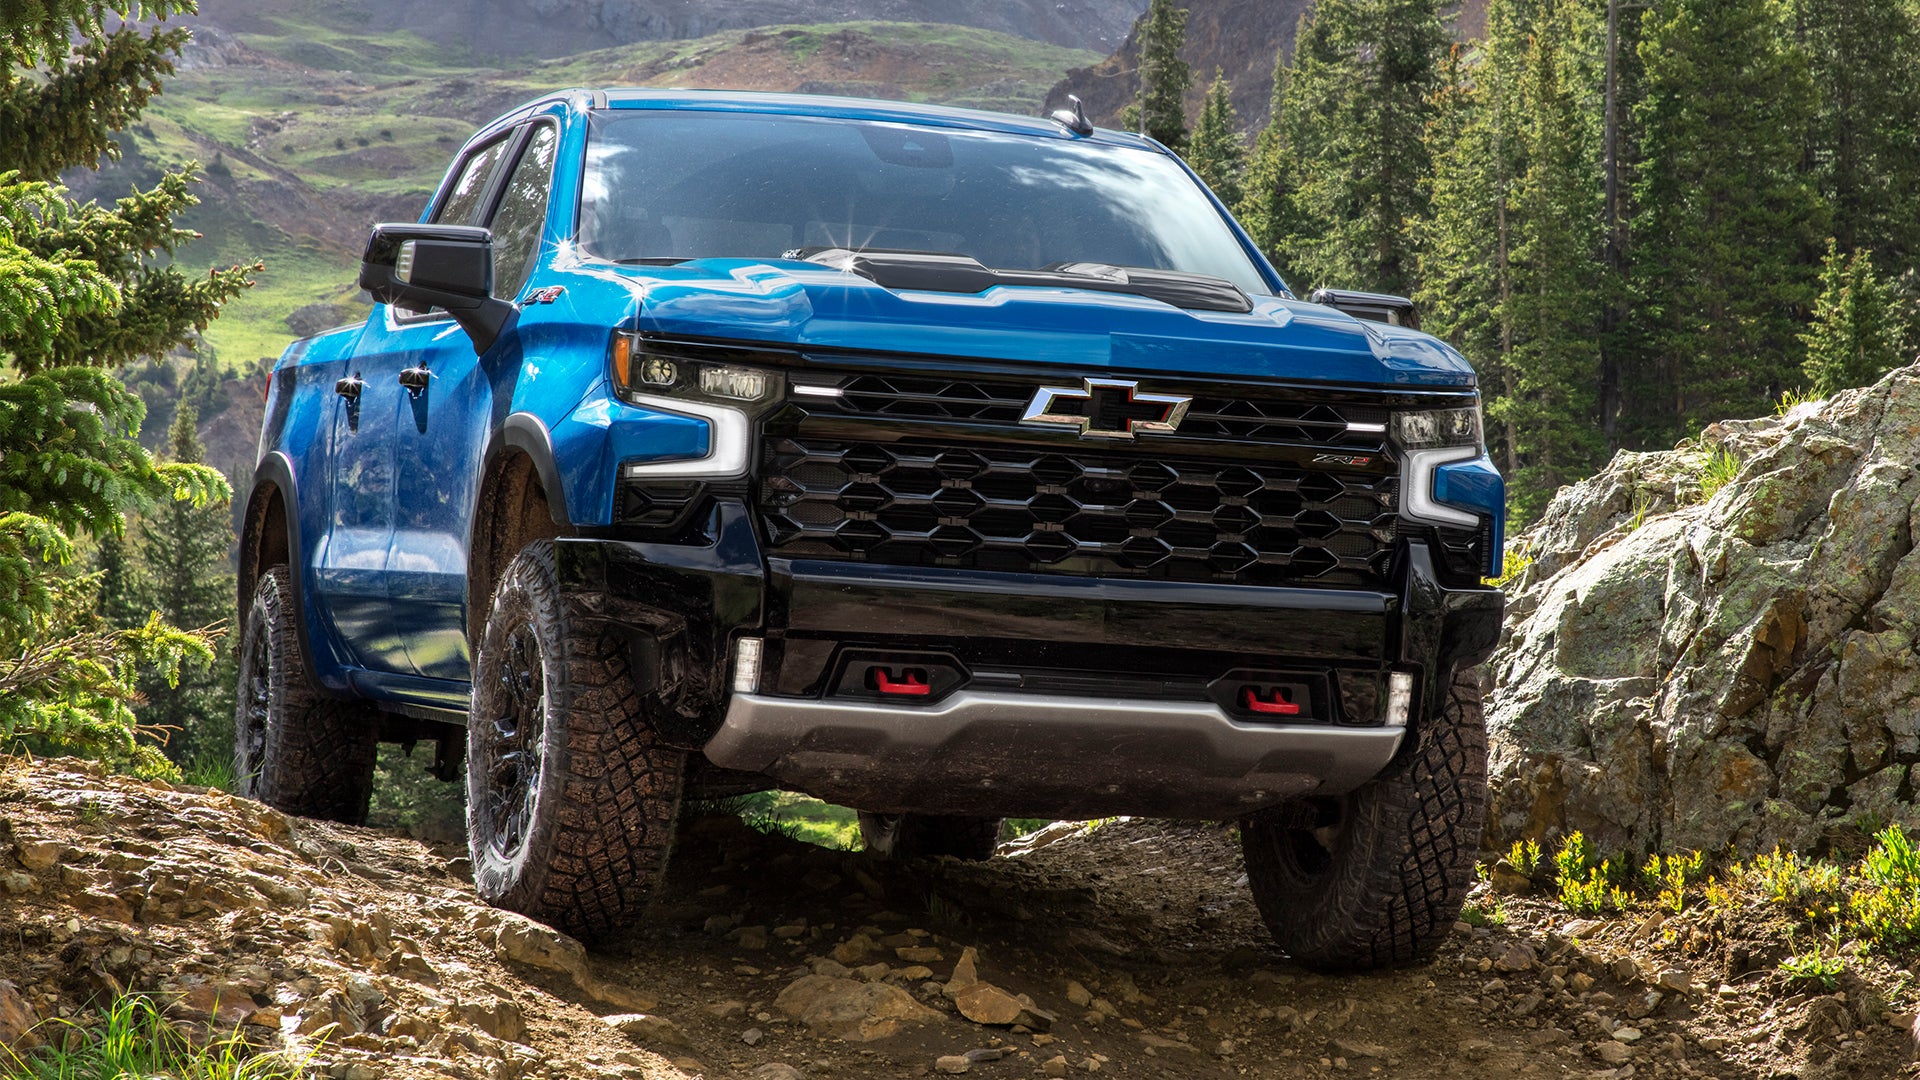 2022 Silverado Pickup Finally Ditches Chevy's Iconic Stacked Headlights